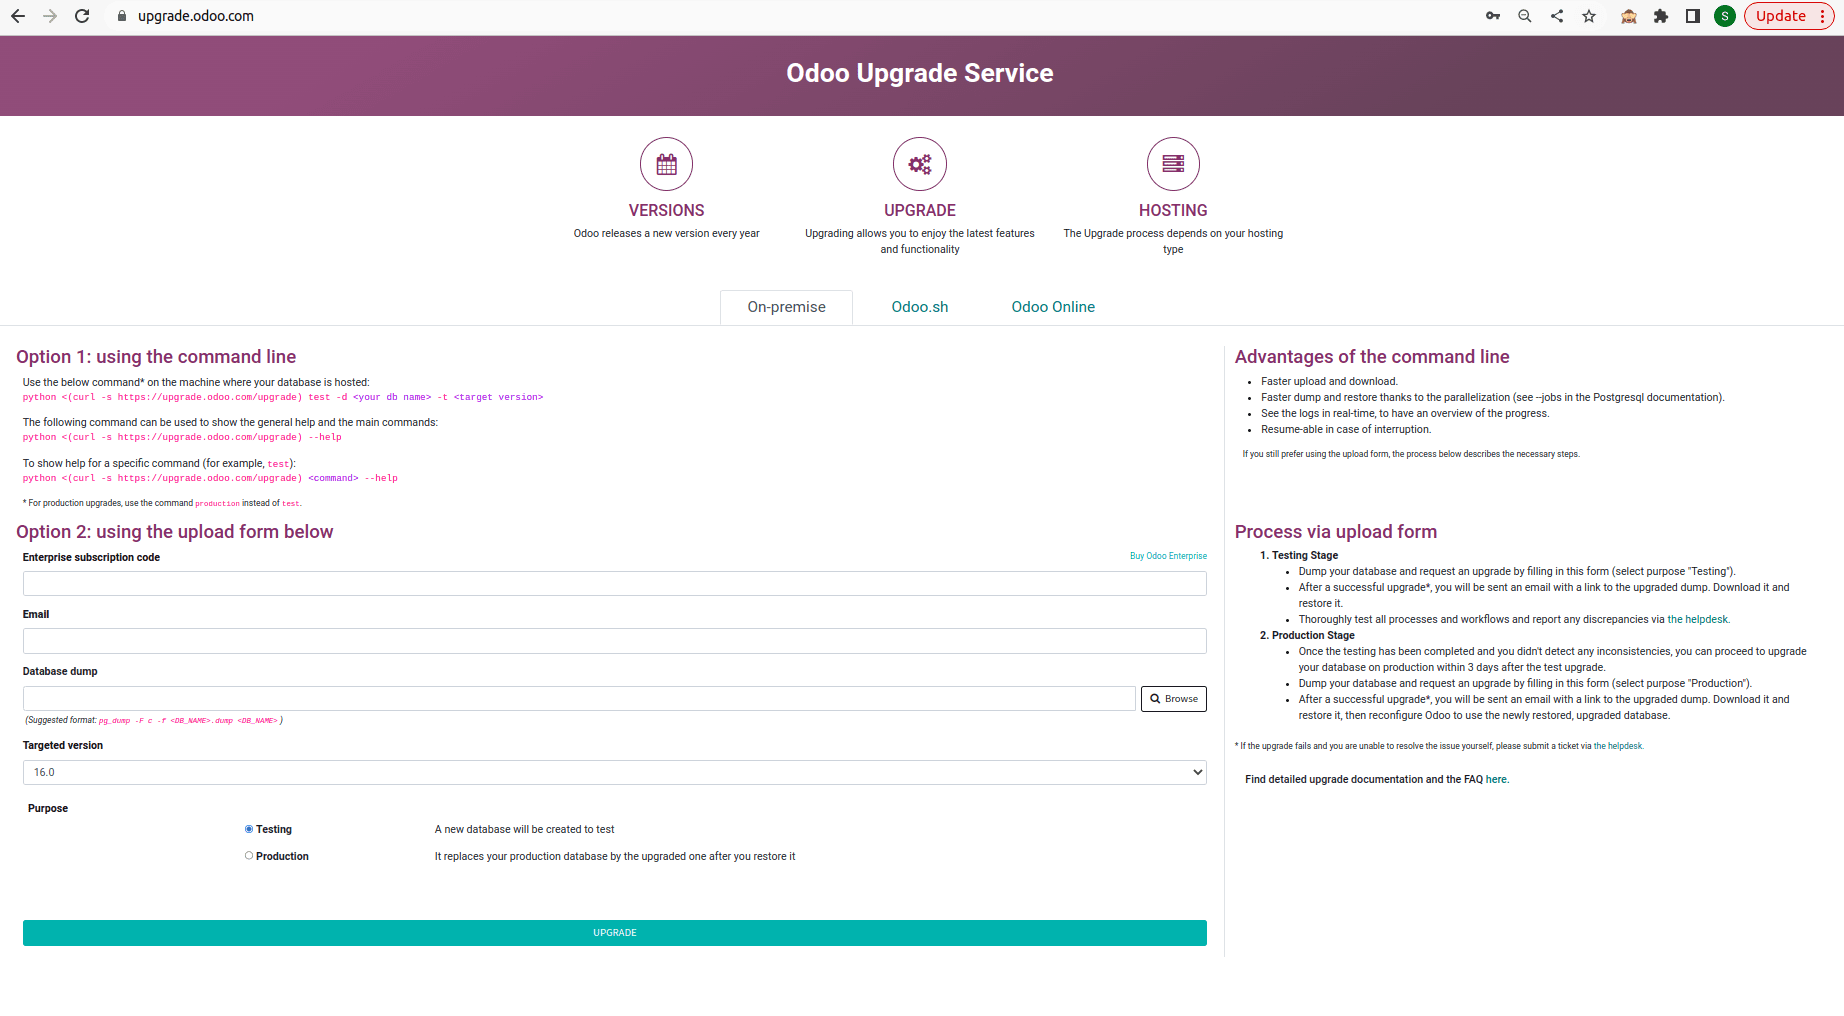 an-insight-into-the-odoo-upgrade-service-1